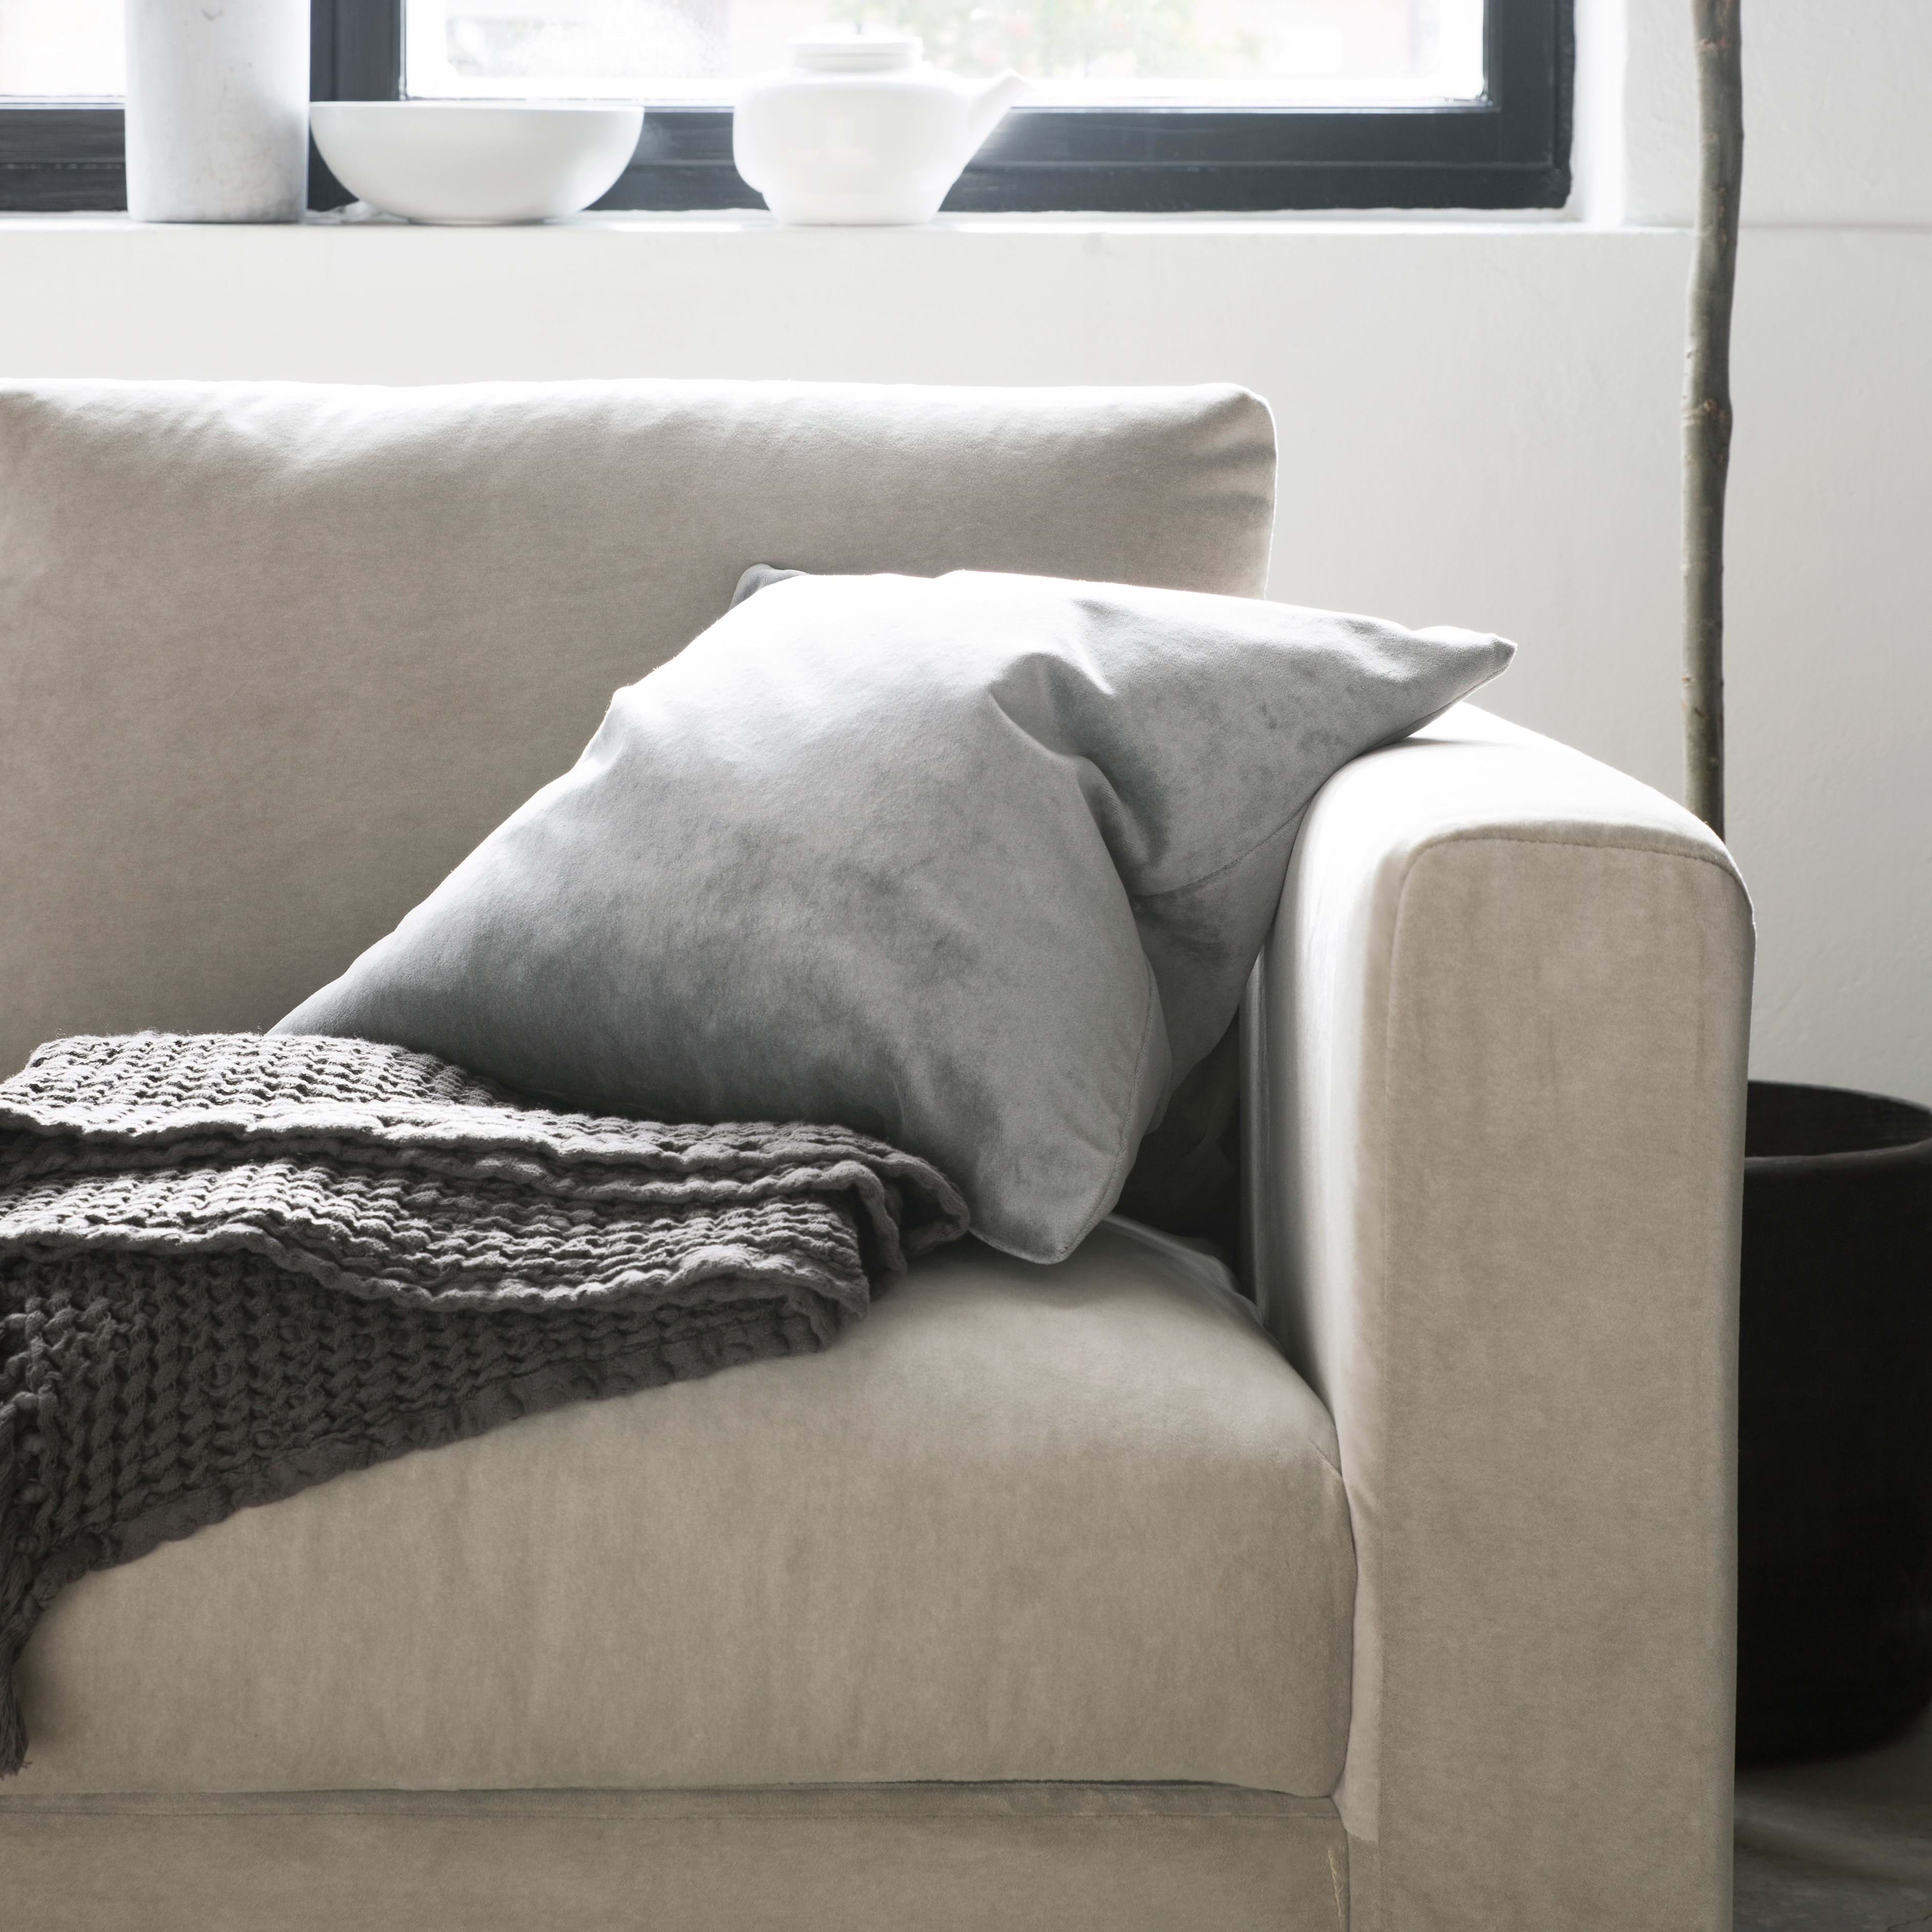 Ikea Vimle Sofa Review And Why We Love It Bemz